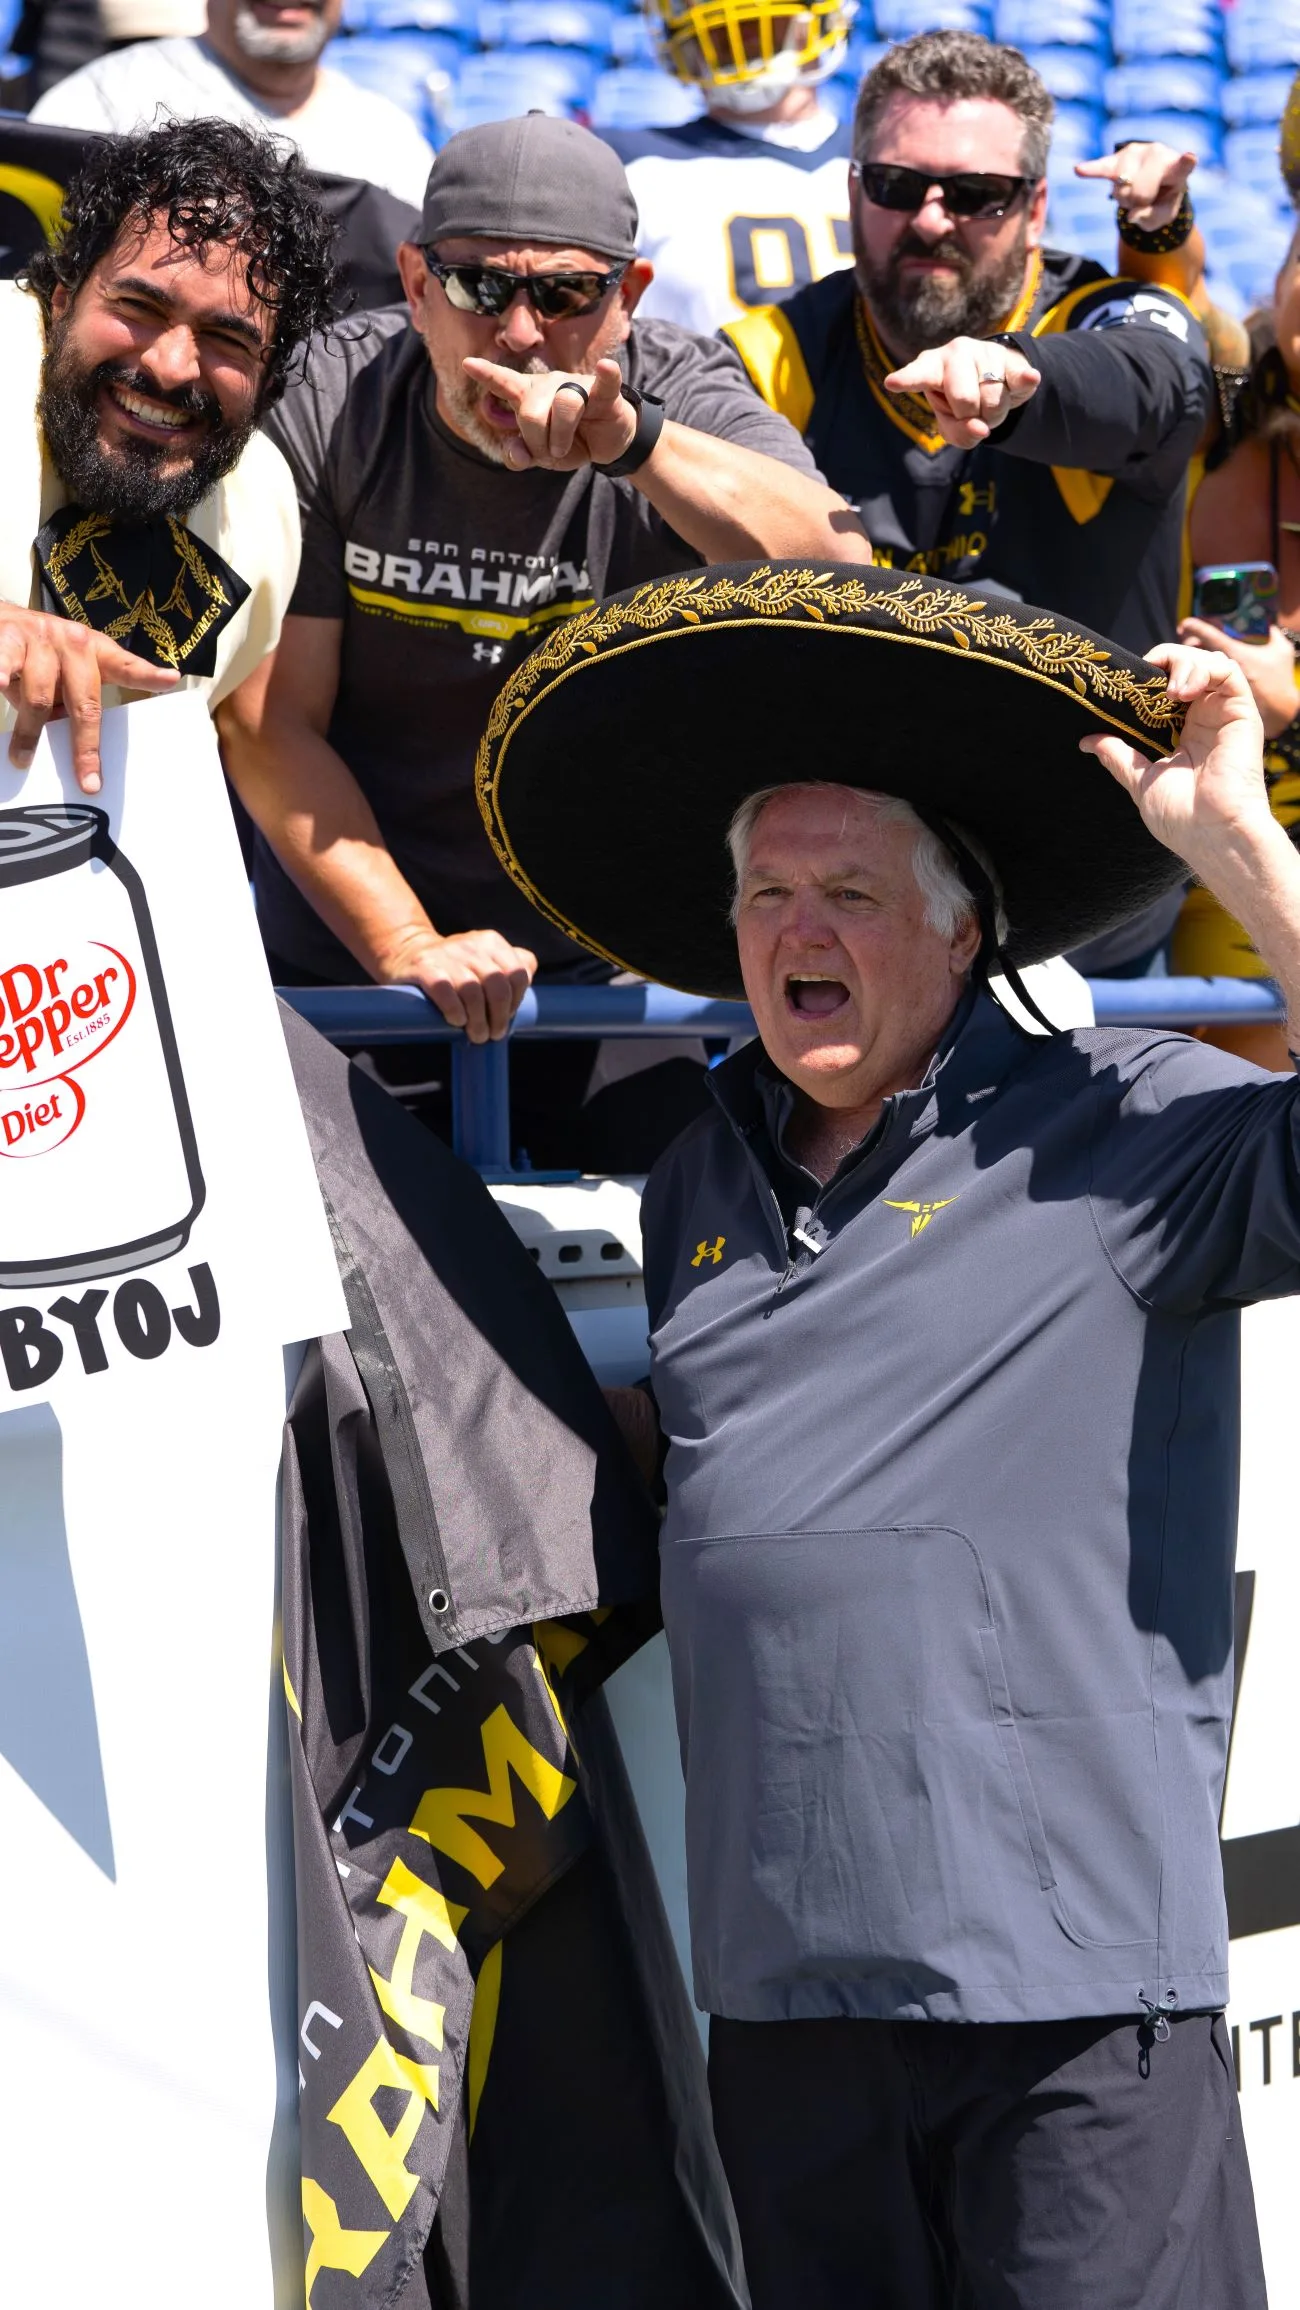 San Antonio coach Wade Phillips tries on a fan's sombrero after the Brahmas staged a big, and late, comeback Saturday to beat Memphis, 20-19, at Simmons Bank Stadium in Memphis. It was the Brahmas' first-ever United Football League (UFL) win. (Photo by JACOB LUCAS - THEFOOTBALLBEAT.COM)